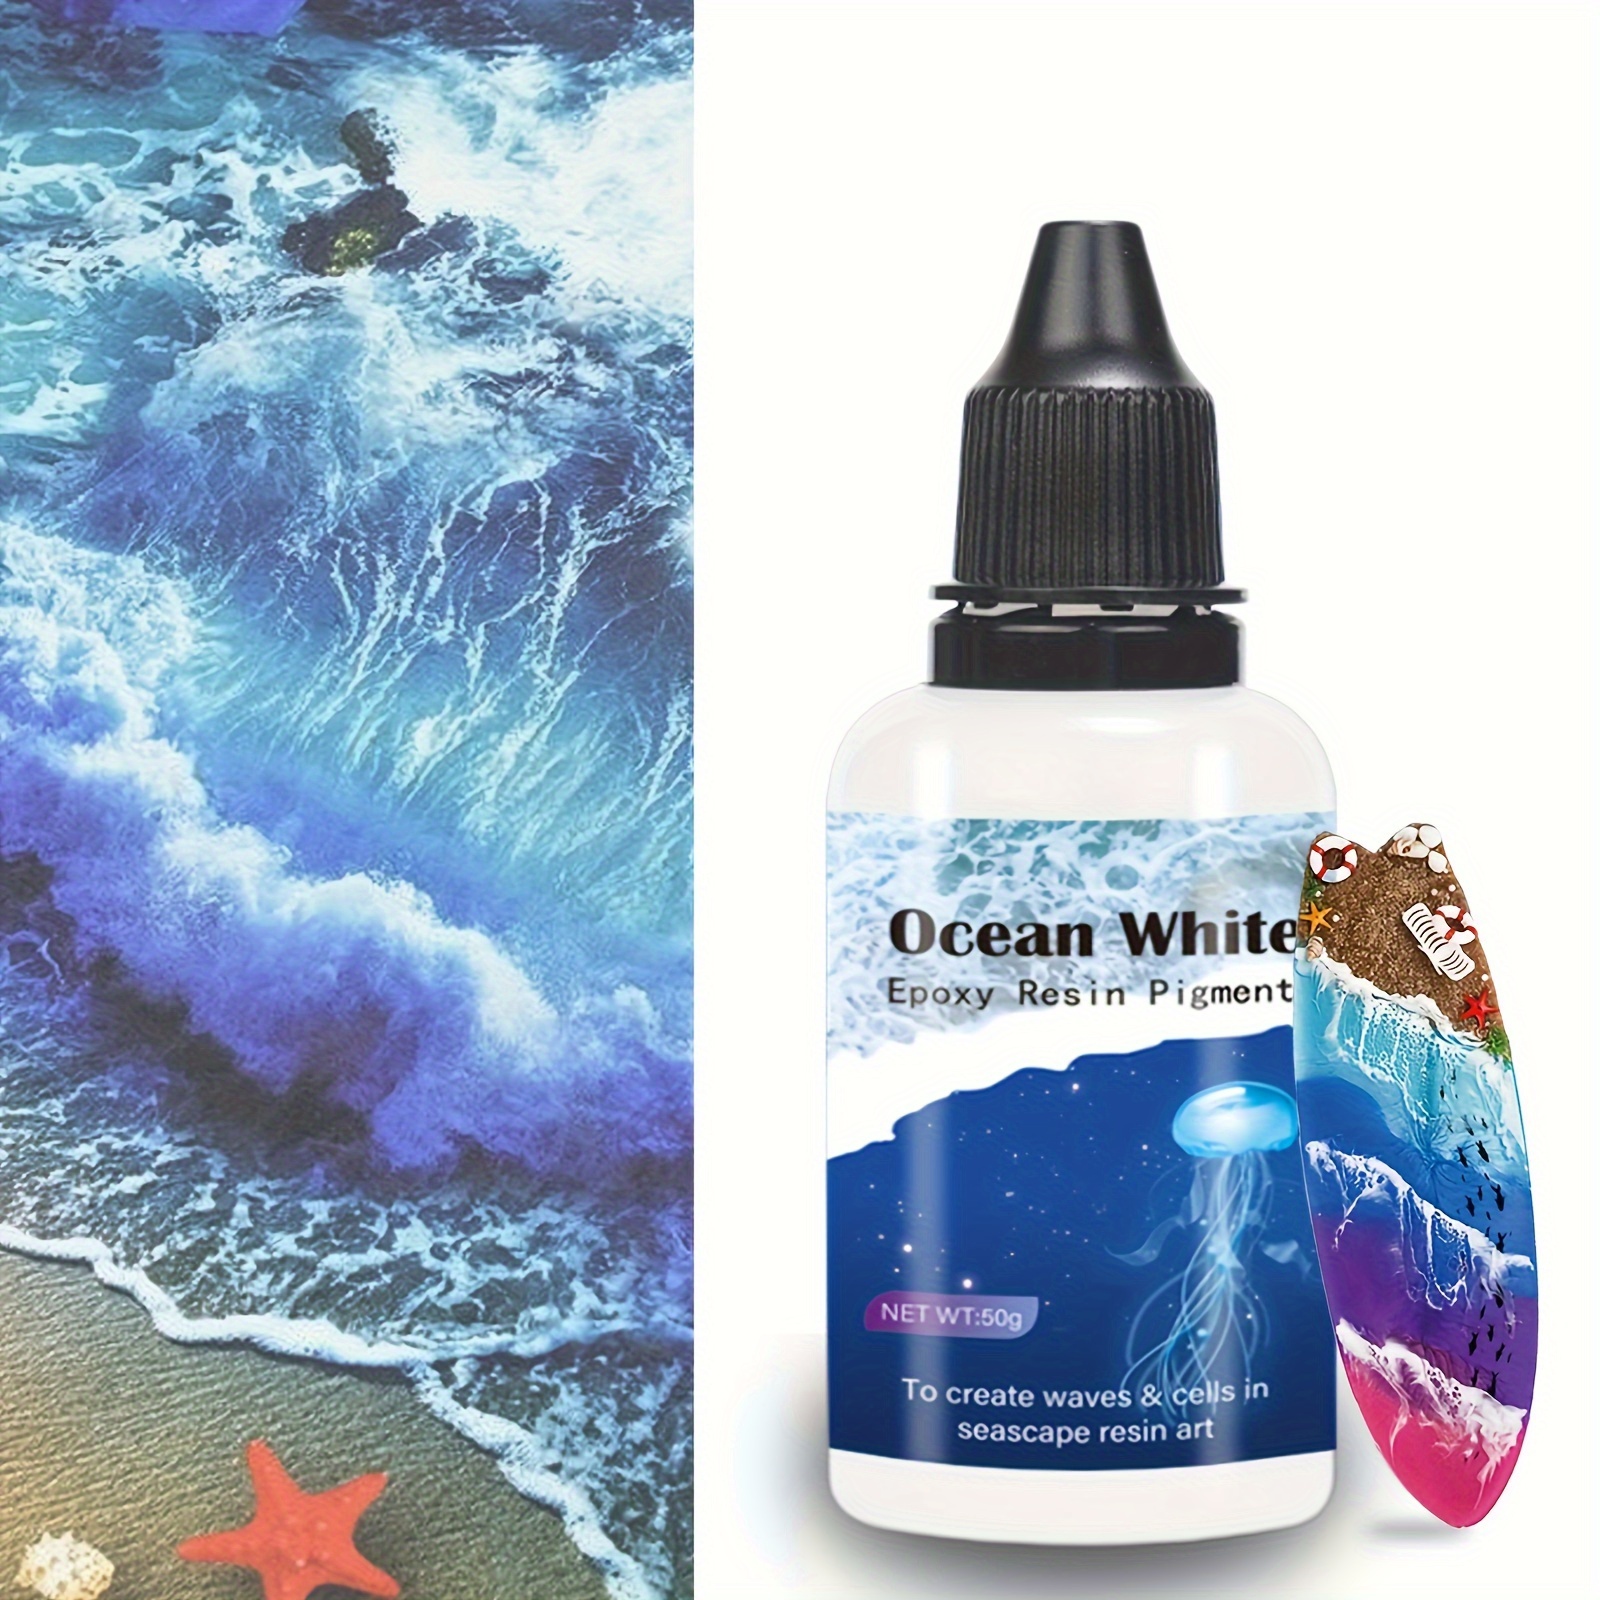 

High Concentrated White Epoxy Resin Pigment Paste 1.76oz/50ml, White Pigment Paste For Resin & Uv Resin, Opaque White Epoxy Colorant For Resin Coloring, Ocean Waves